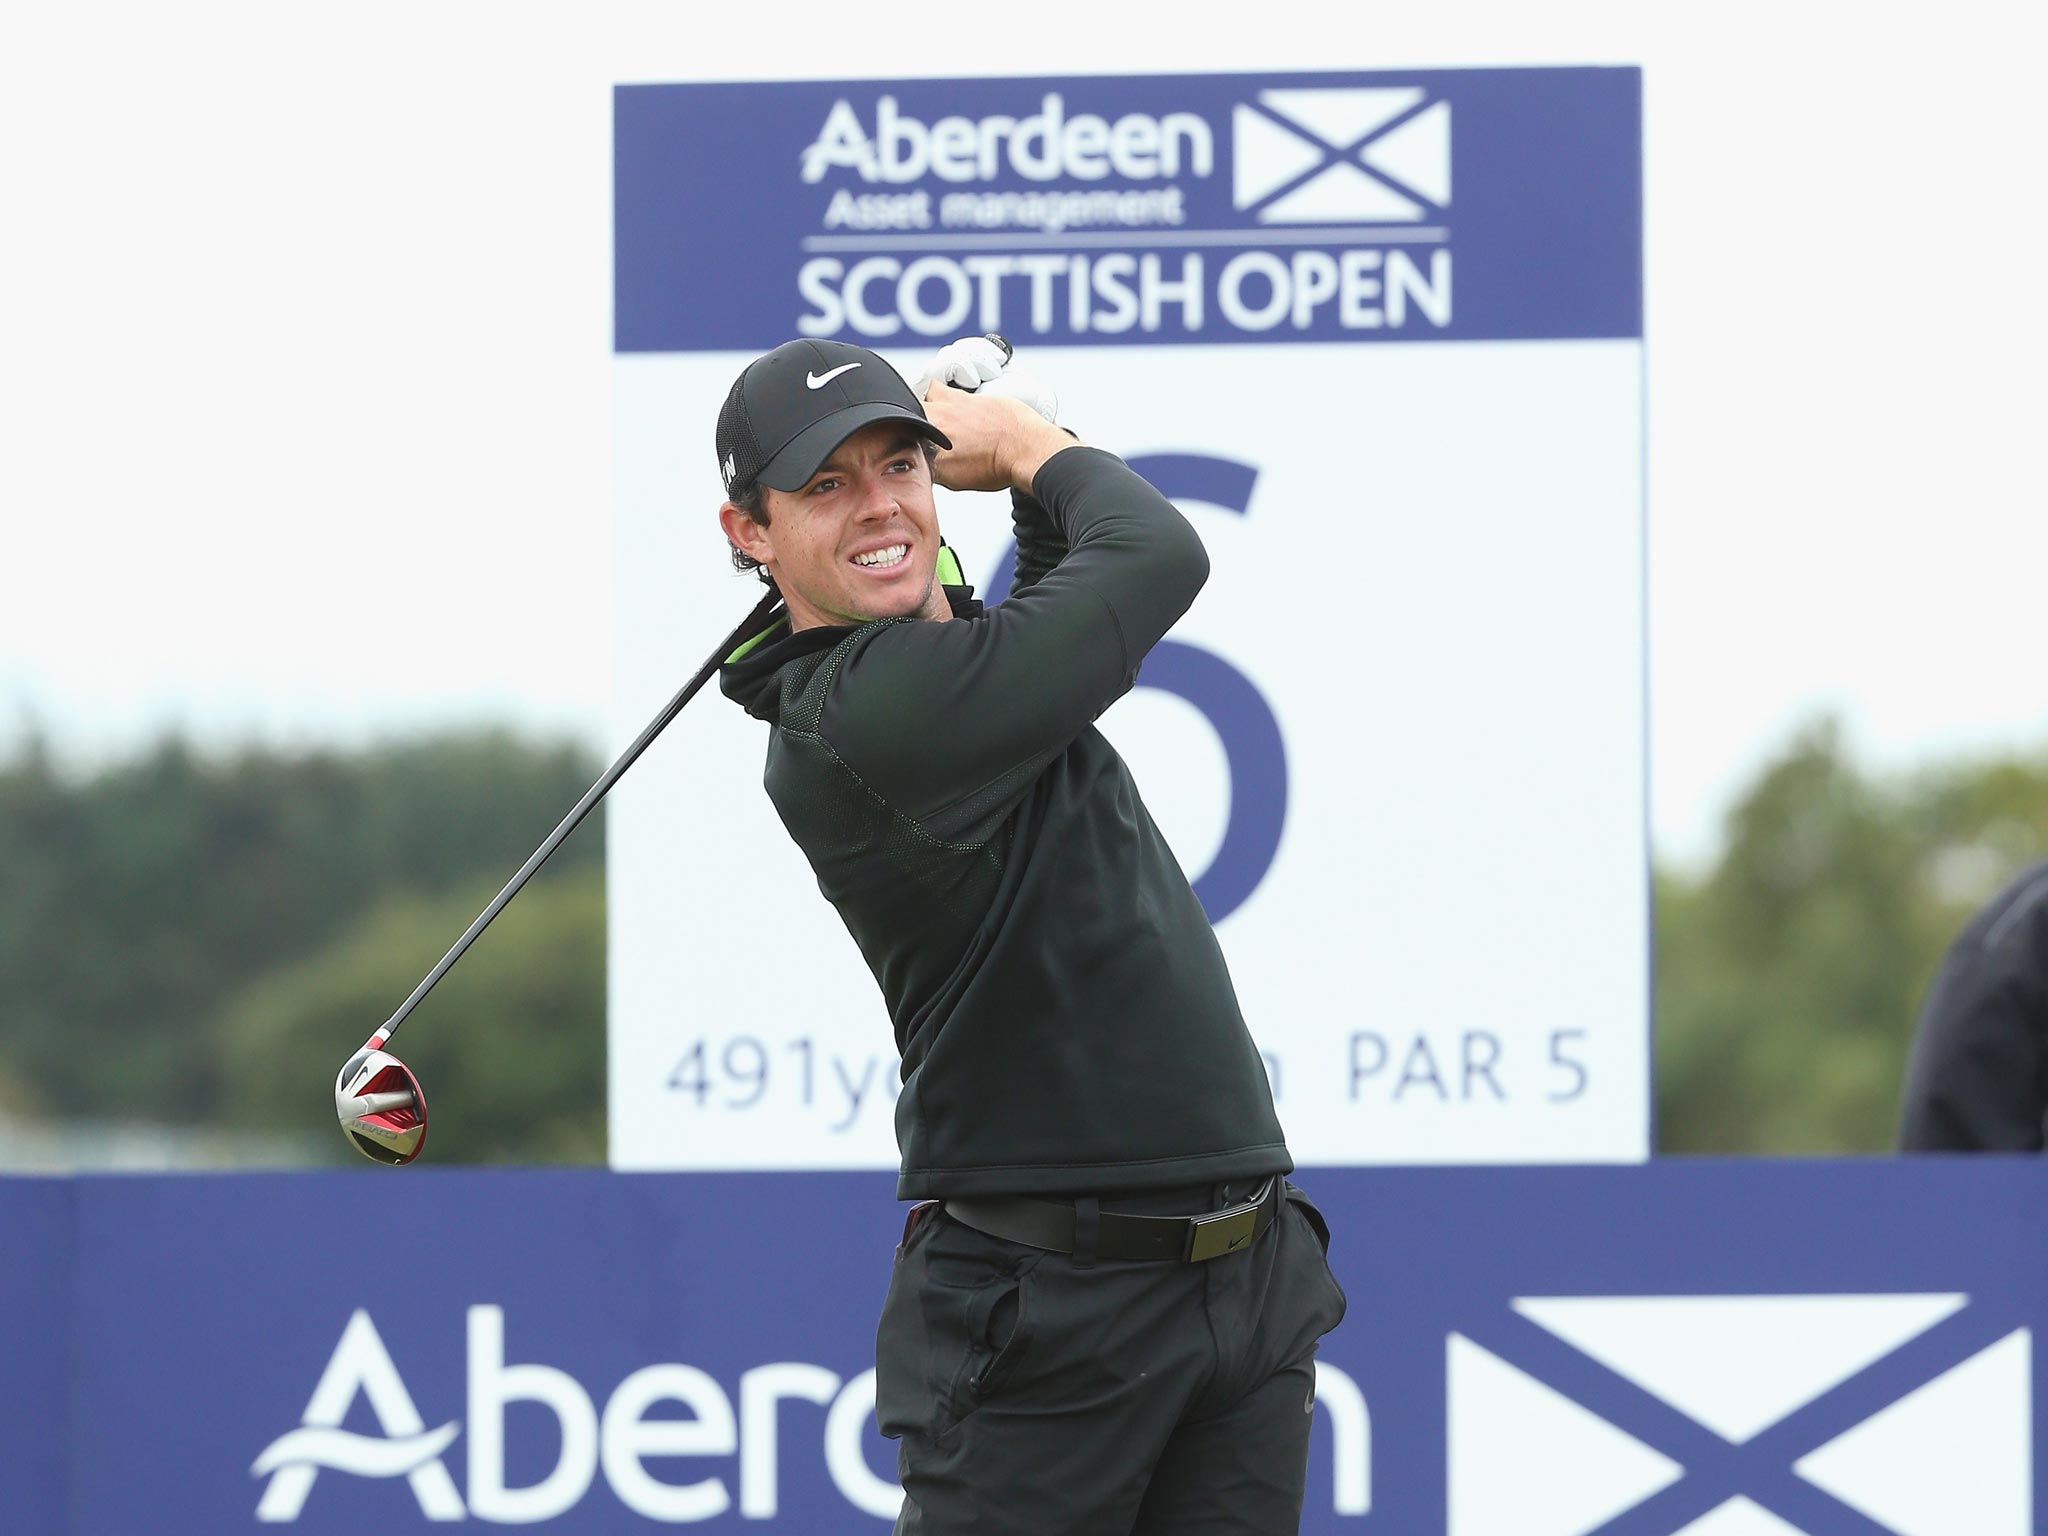 Rory McIlroy tees off in Aberdeen yesterday